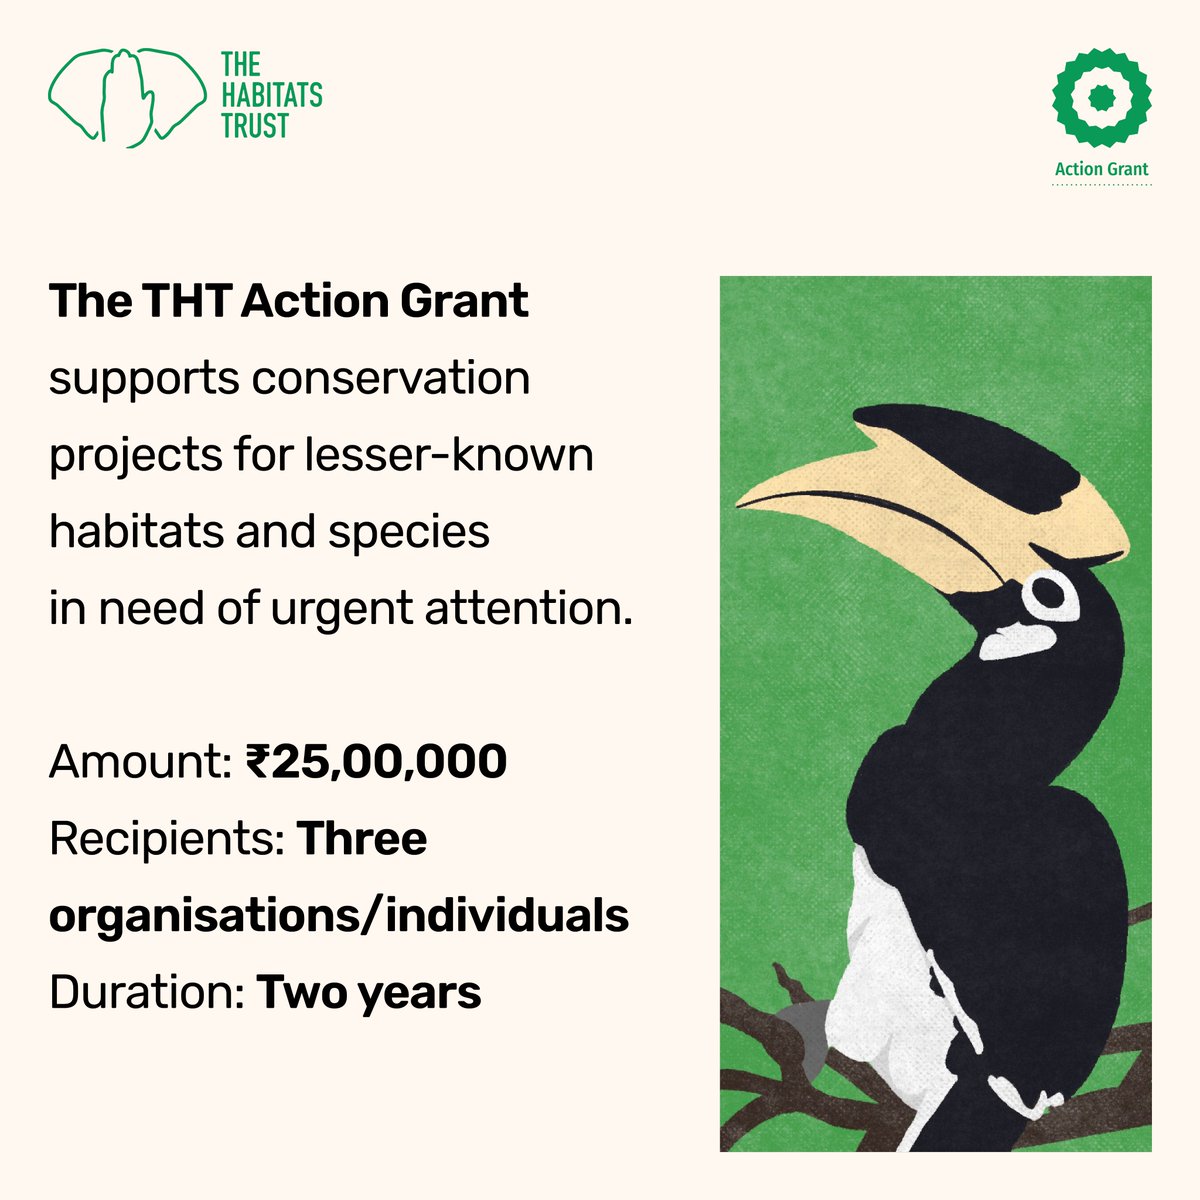 #THTGrants | The THT Action Grant is given annually to three recipients for protecting endangered species and habitats via hands-on conservation efforts. Check thehabitatstrust.org/grants.php P.S: The portal opens next week! #THTGrants2024 #TheHabitatsTrustGrants  #THTActionGrant